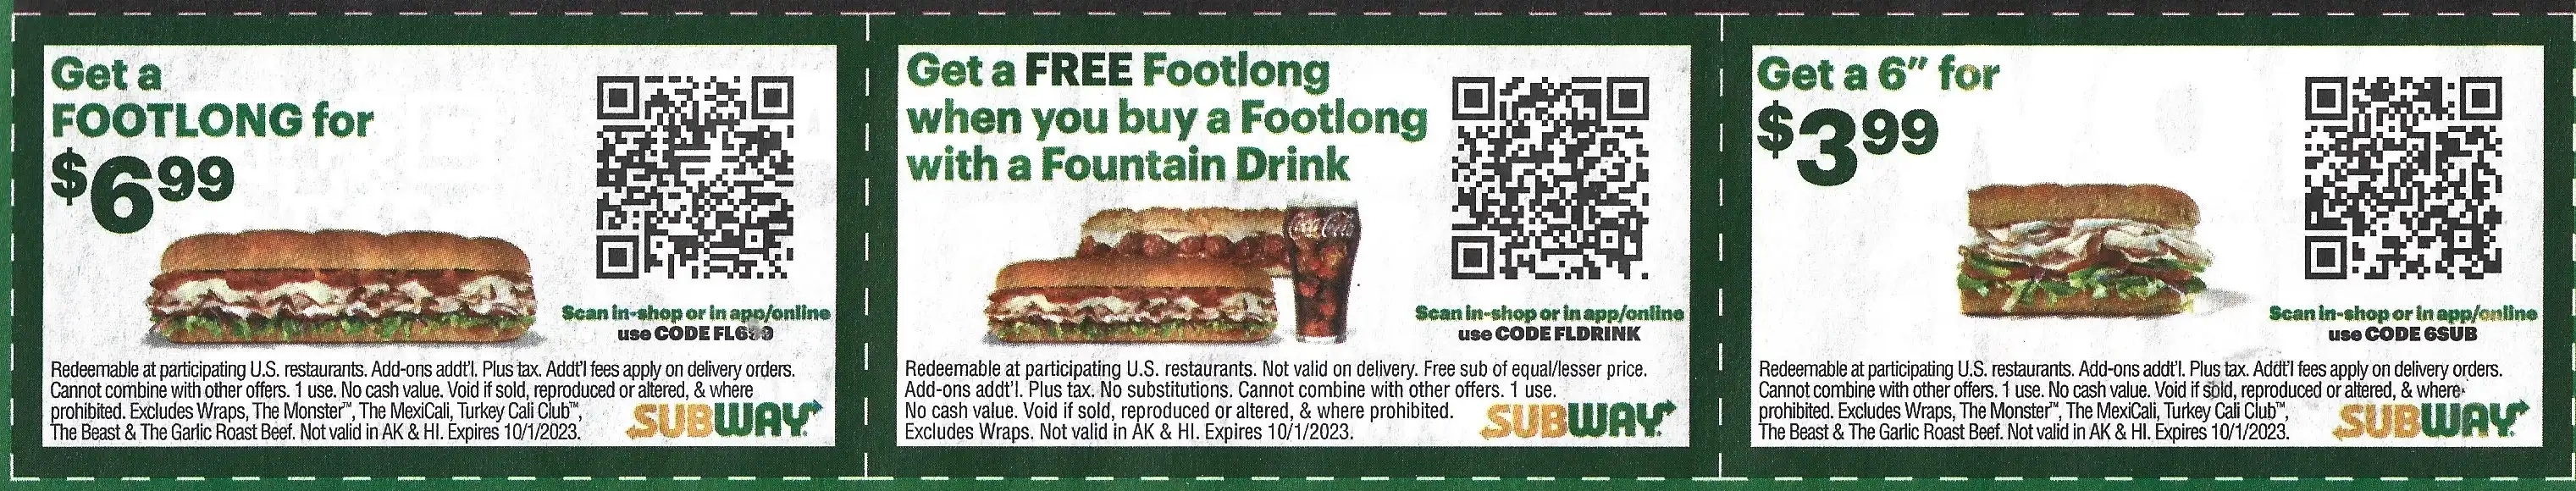 Subway Printable Store Coupons QR Codes Mailer Newspaper 2 Expires 10/01/2023